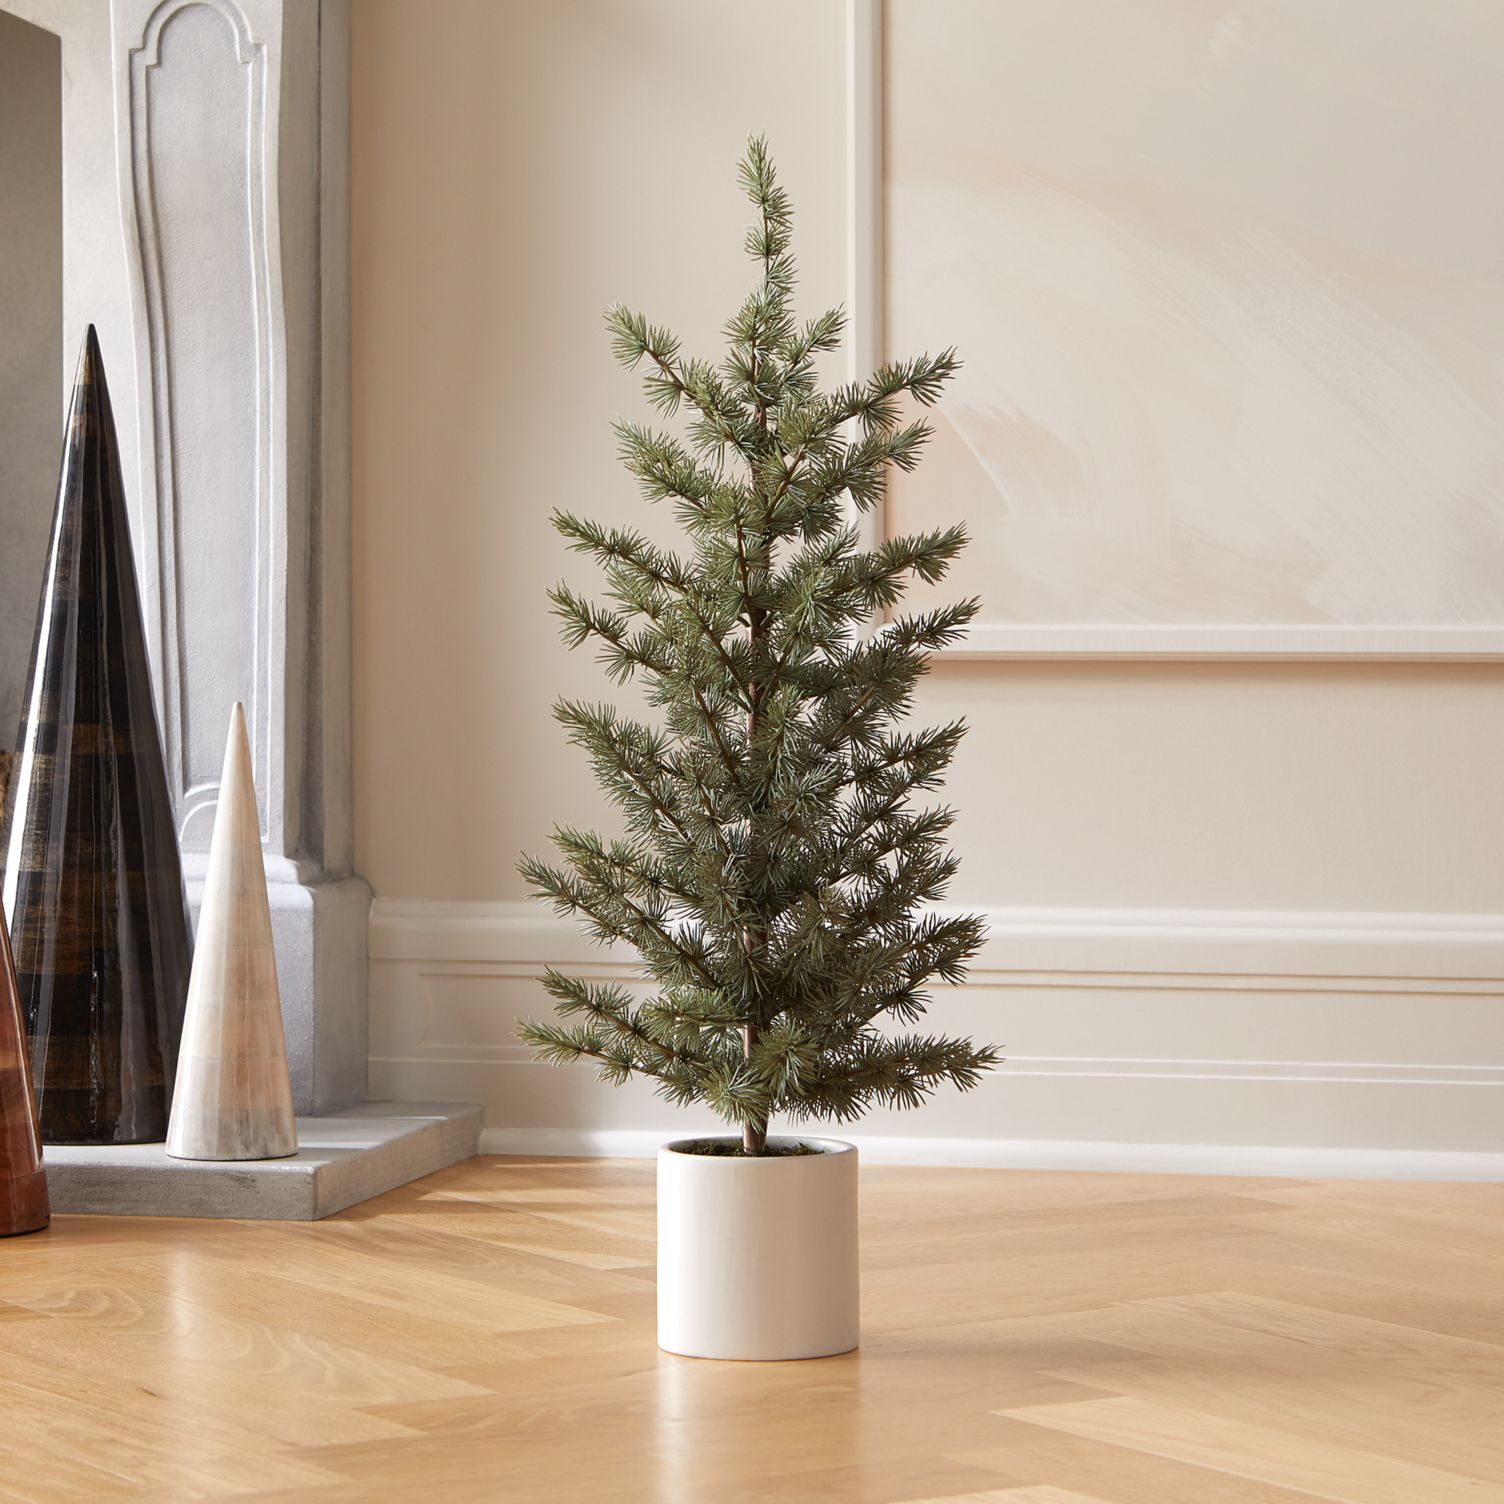 Potted-pine-tree-from-CB2